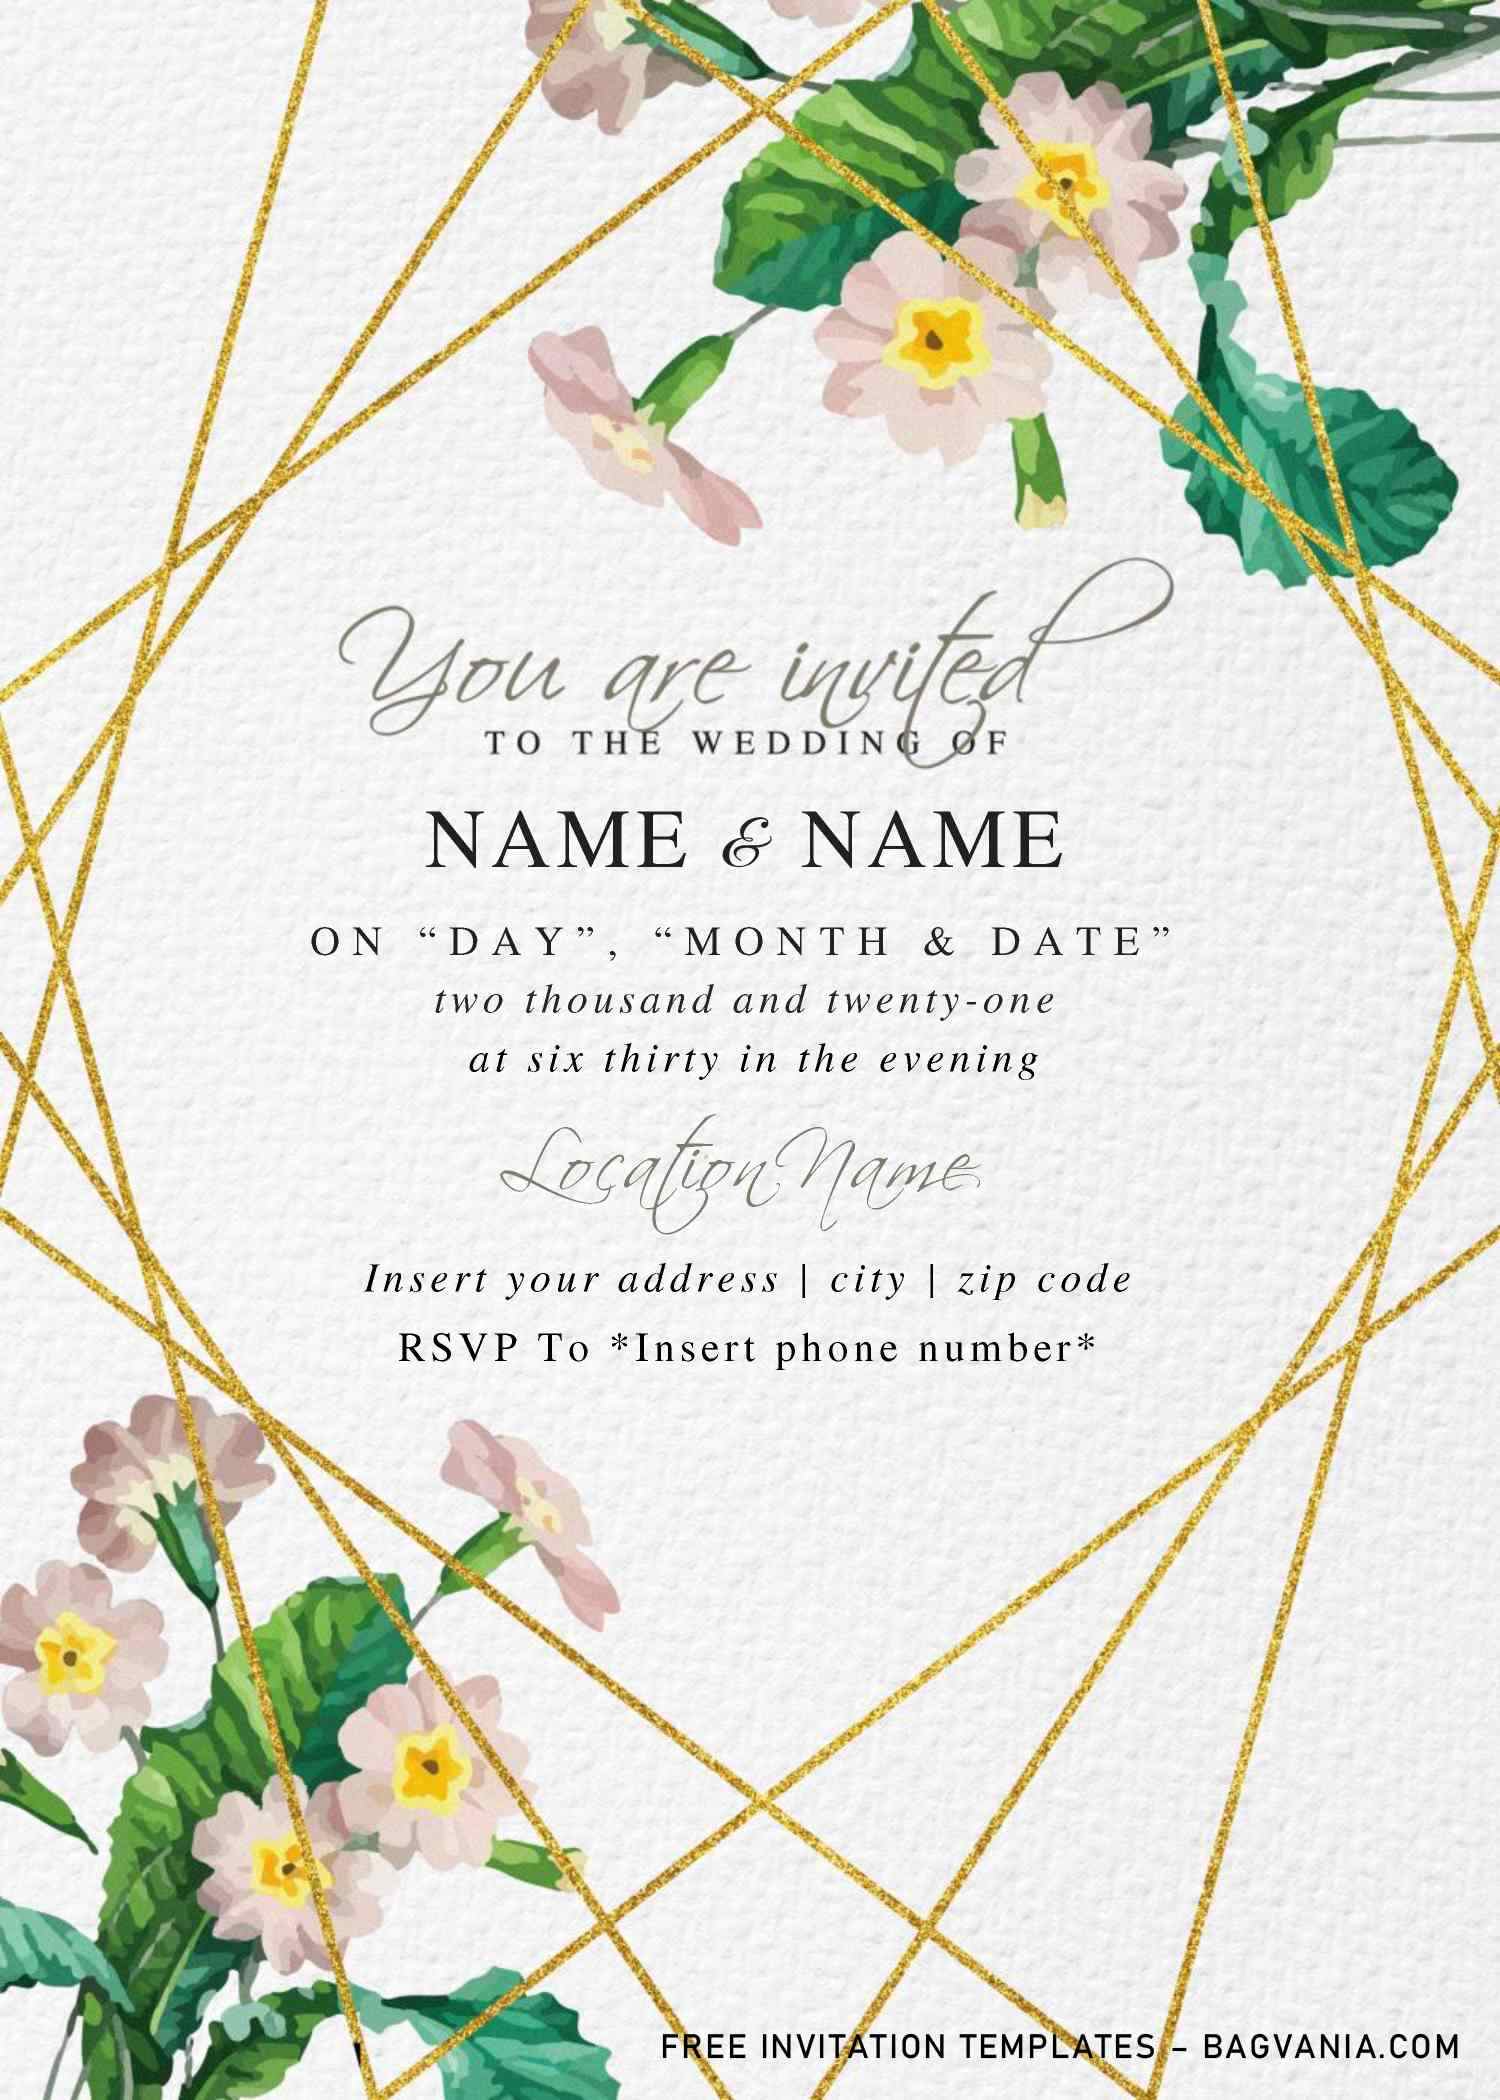 Free Botanical Floral Wedding Invitation Templates For Word | FREE ...